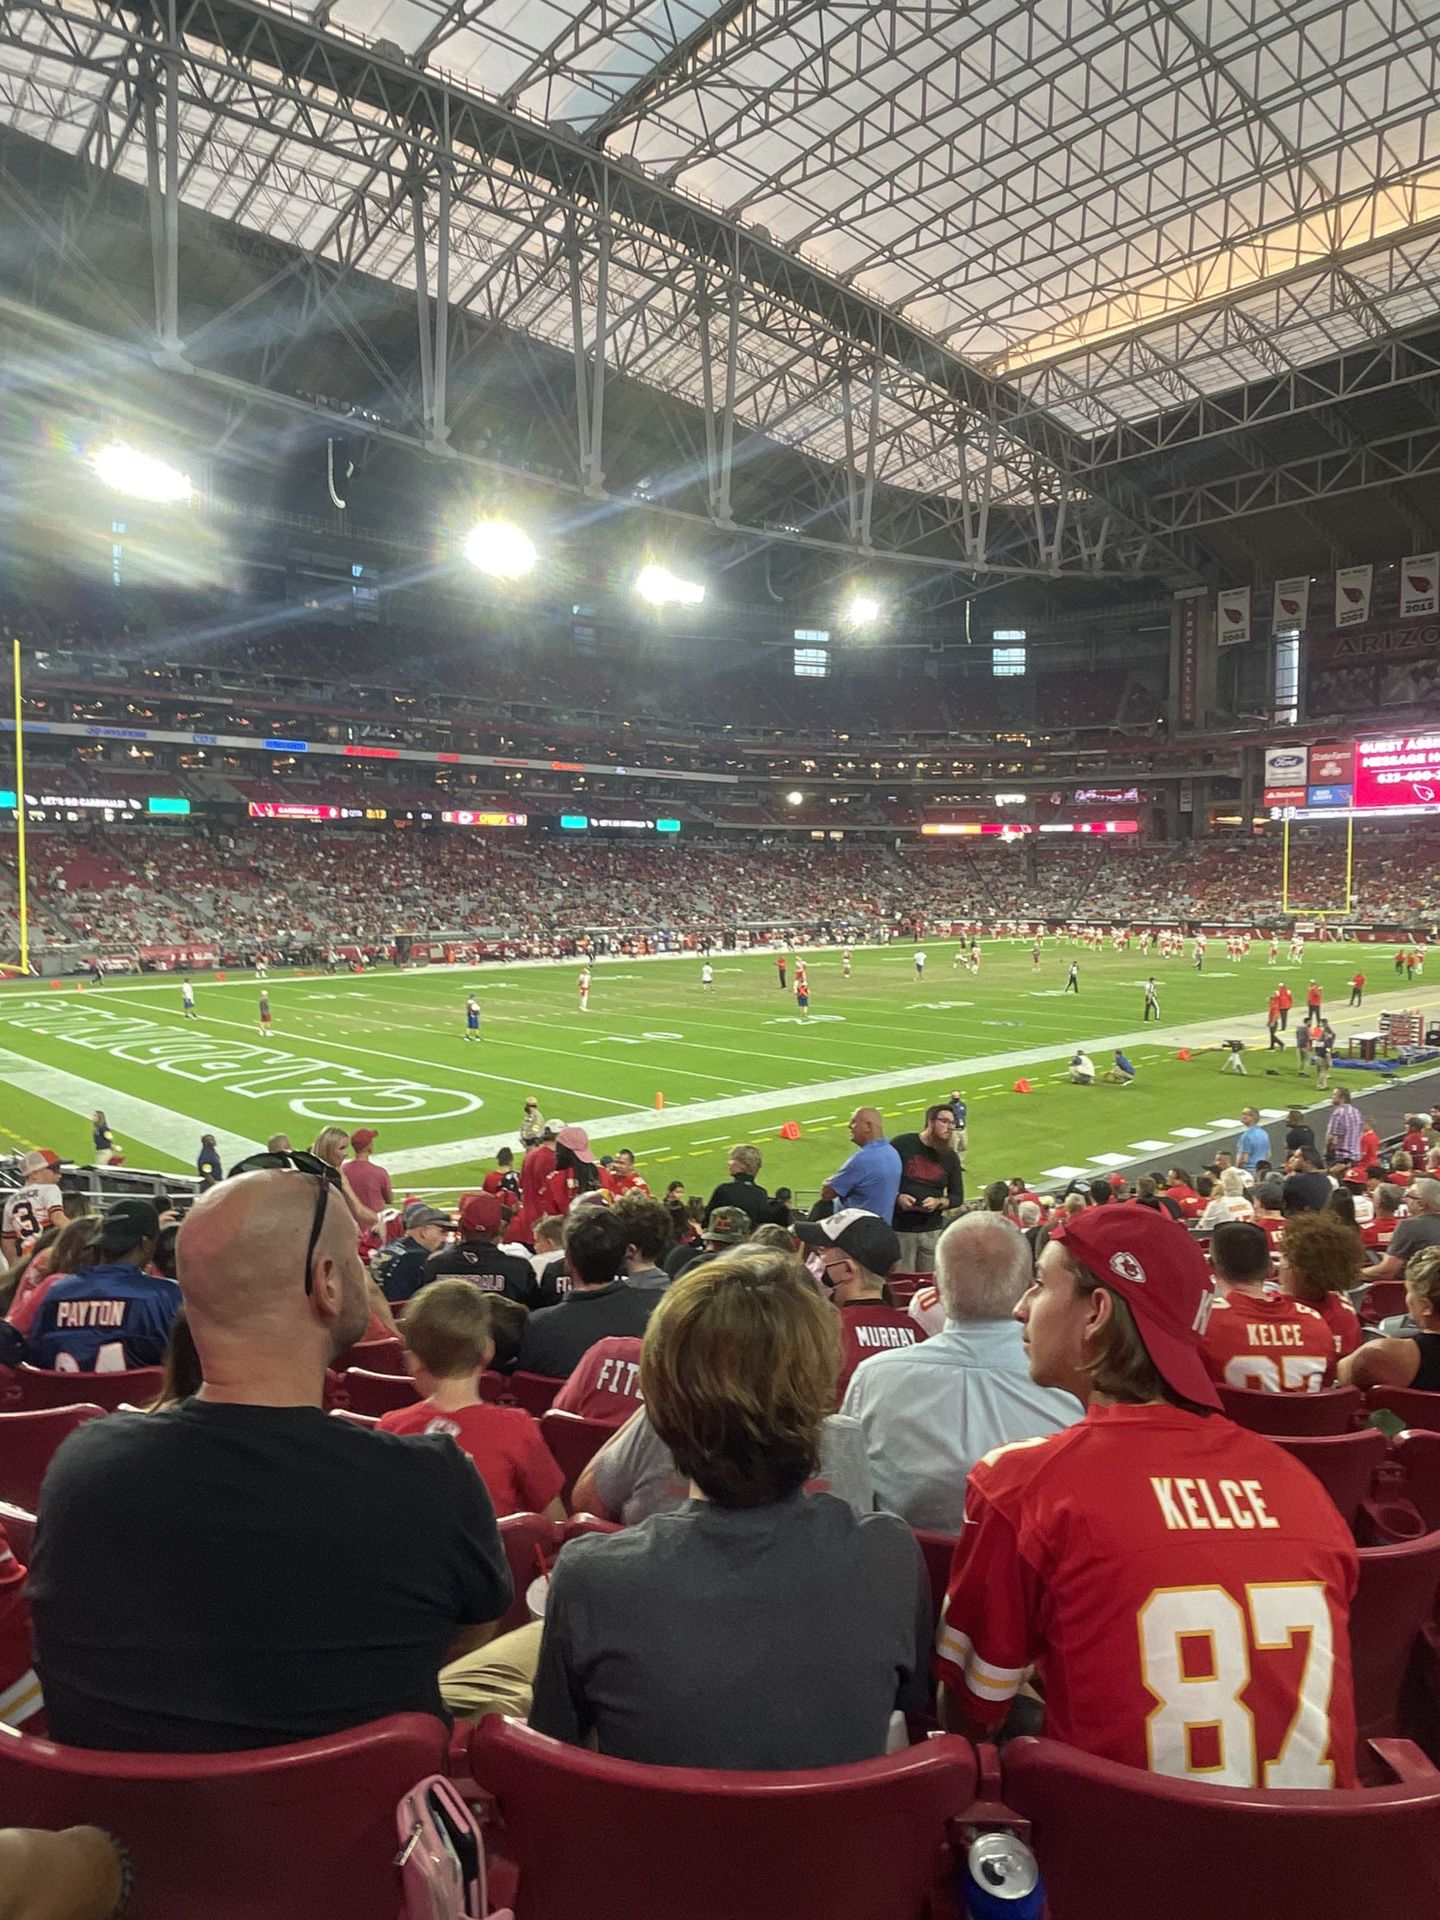 Cardinals vs Packers - 2 tickets